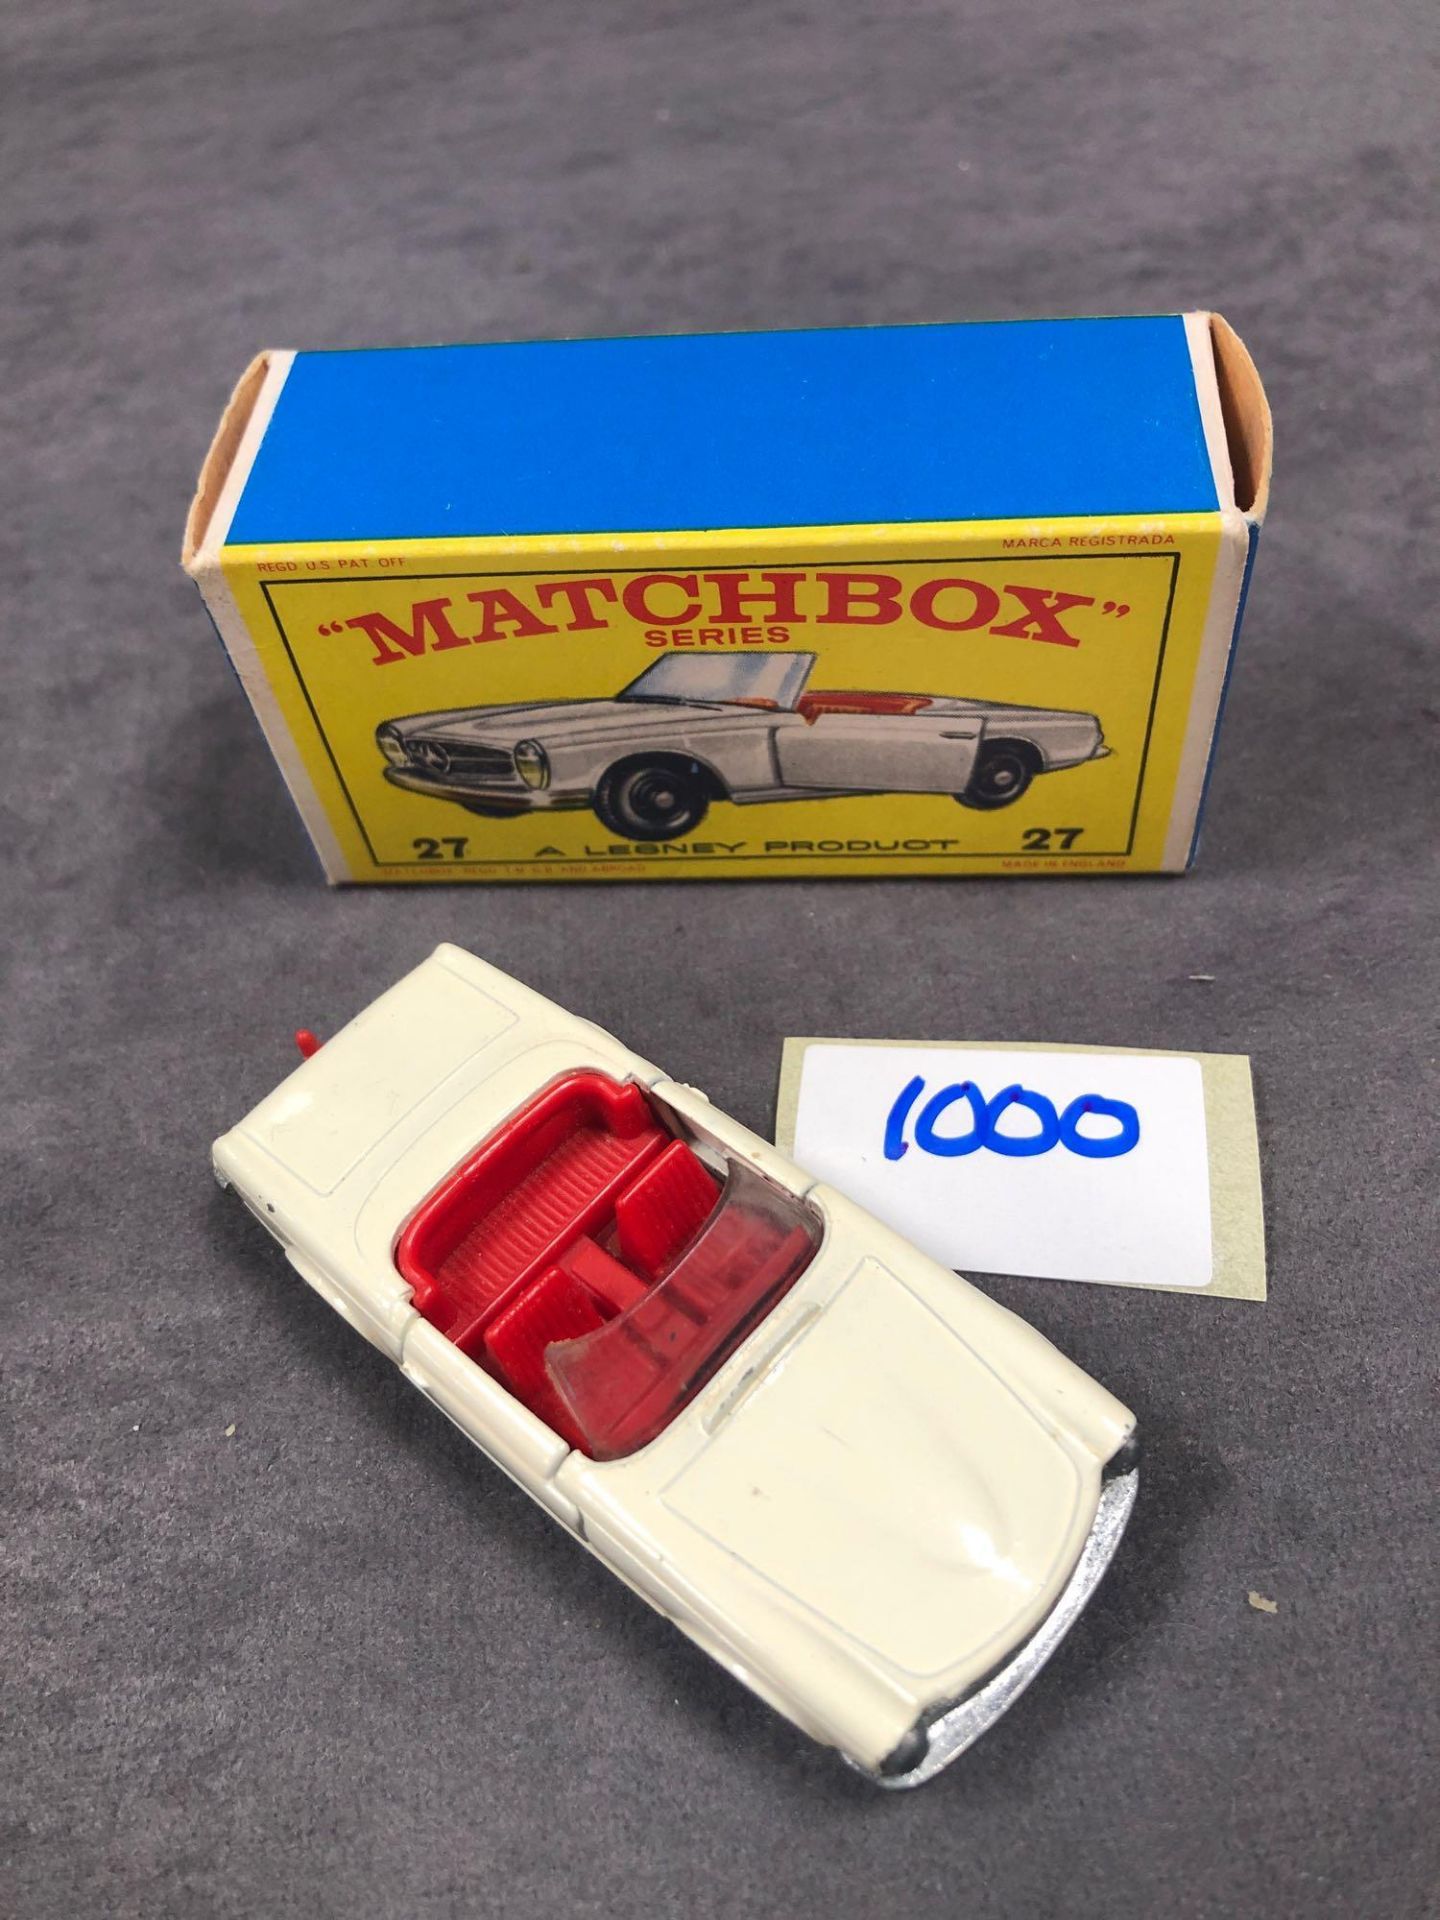 Near Mint Matchbox Series Lesney Diecast #27 Mercedes-Benz 230 SL With An Unpainted Base In